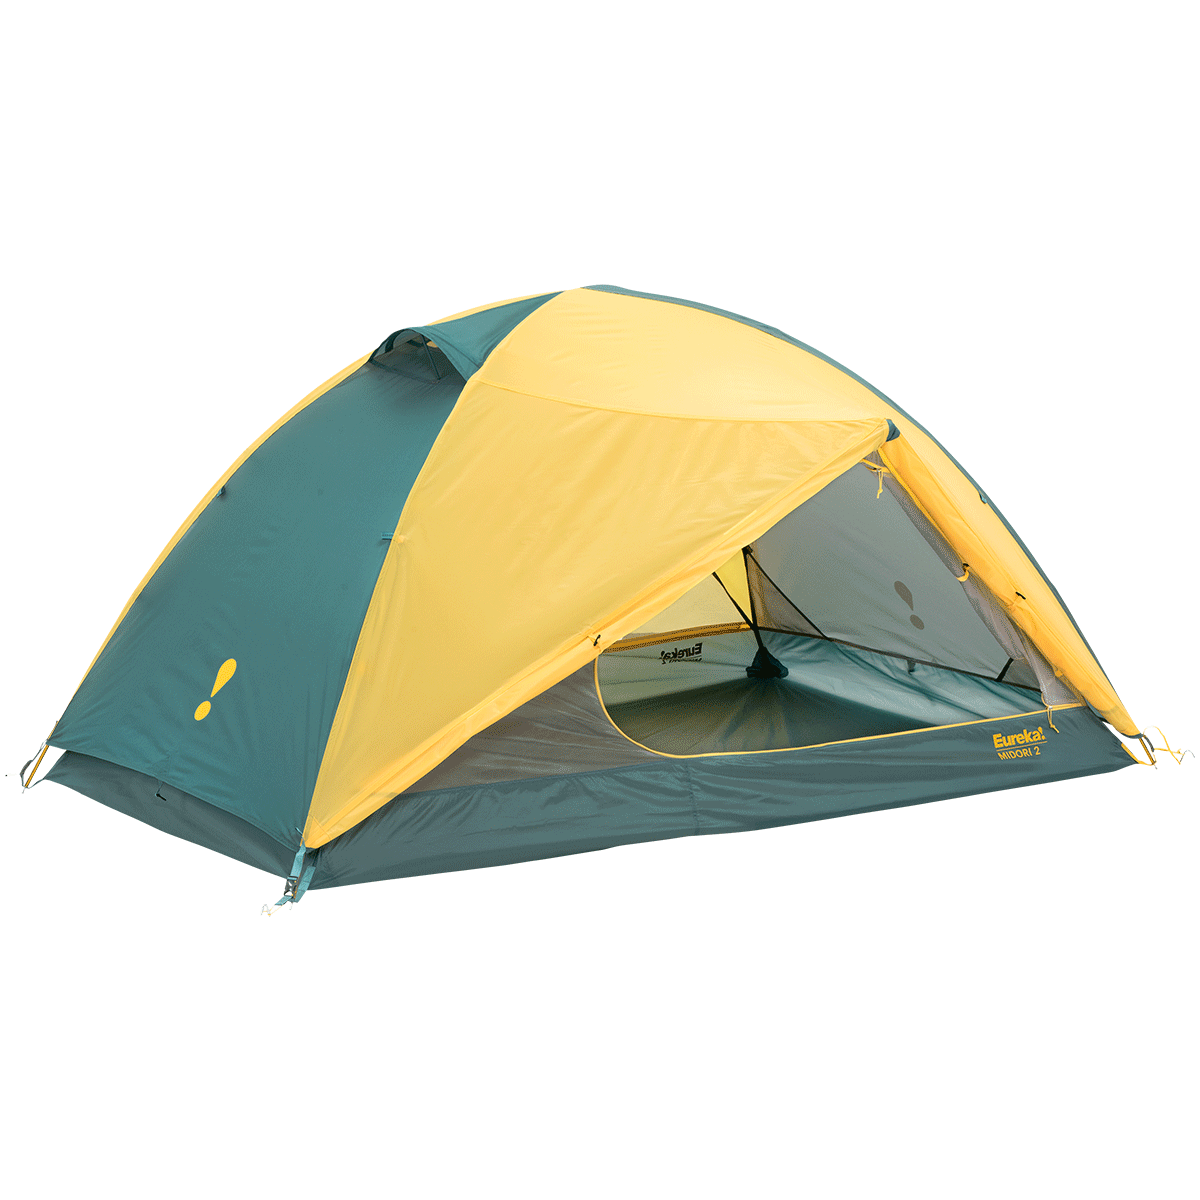 Midori 2 tent with rainfly on and door open